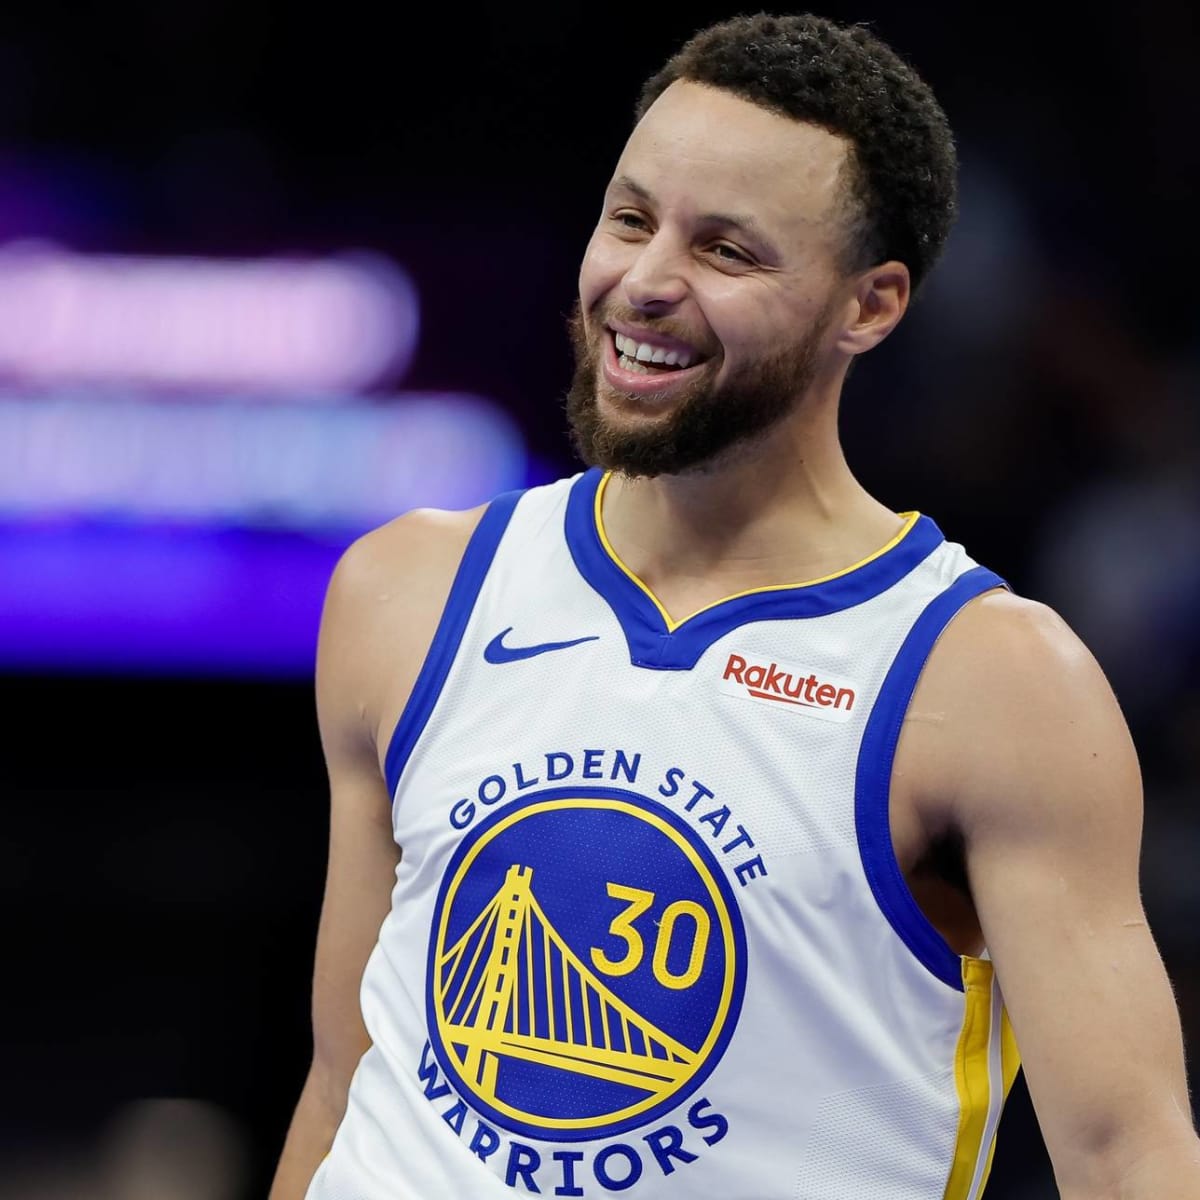 Steph Curry's religion in question